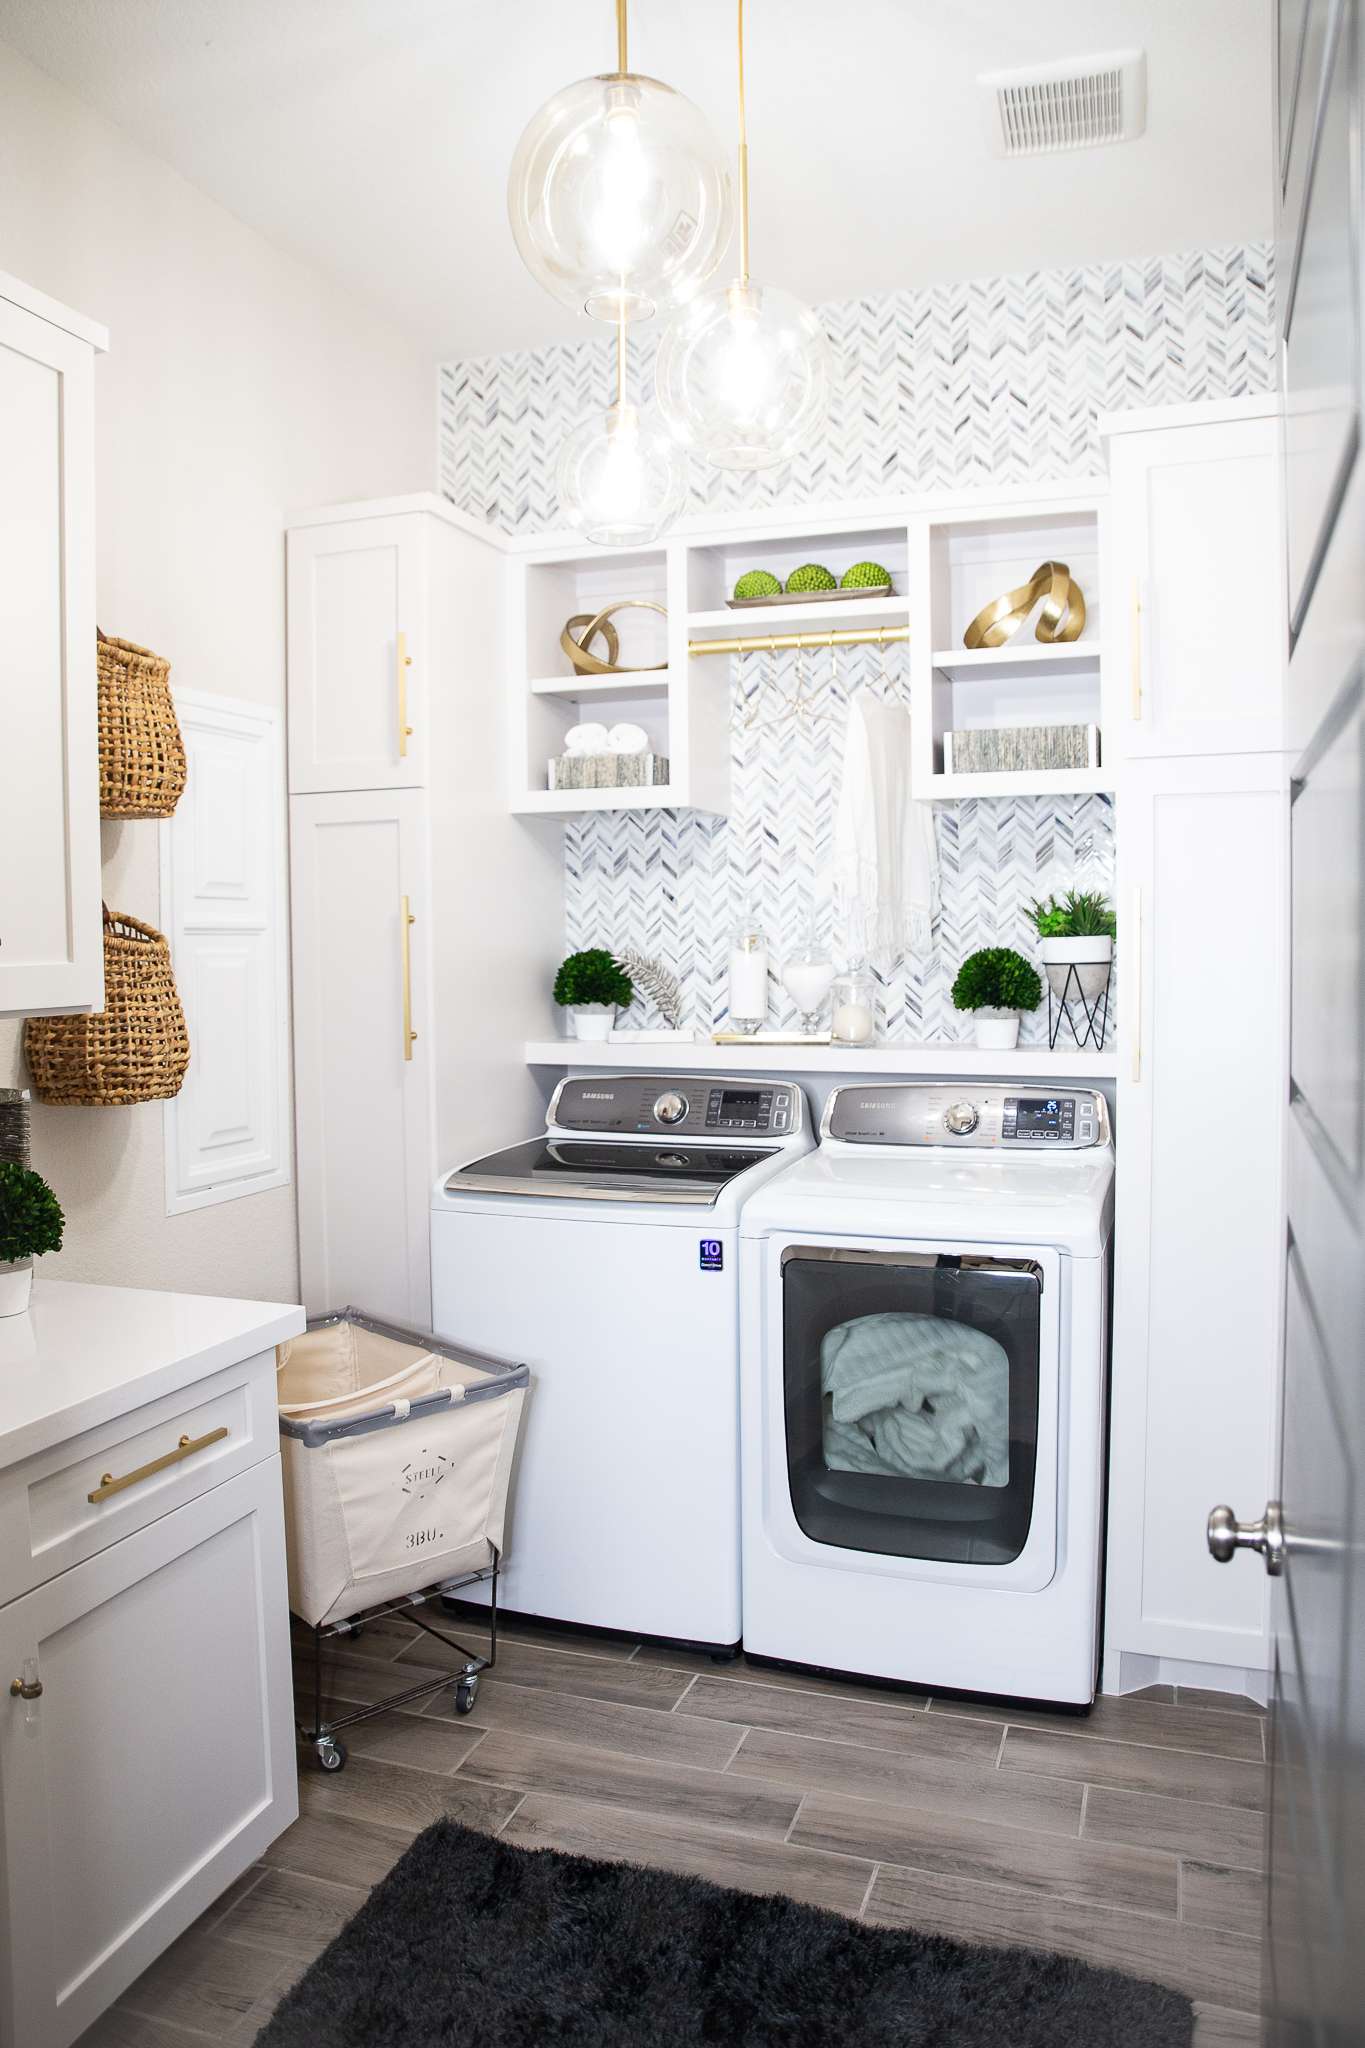 10 Simple Tips for decorating the laundry room on a budget